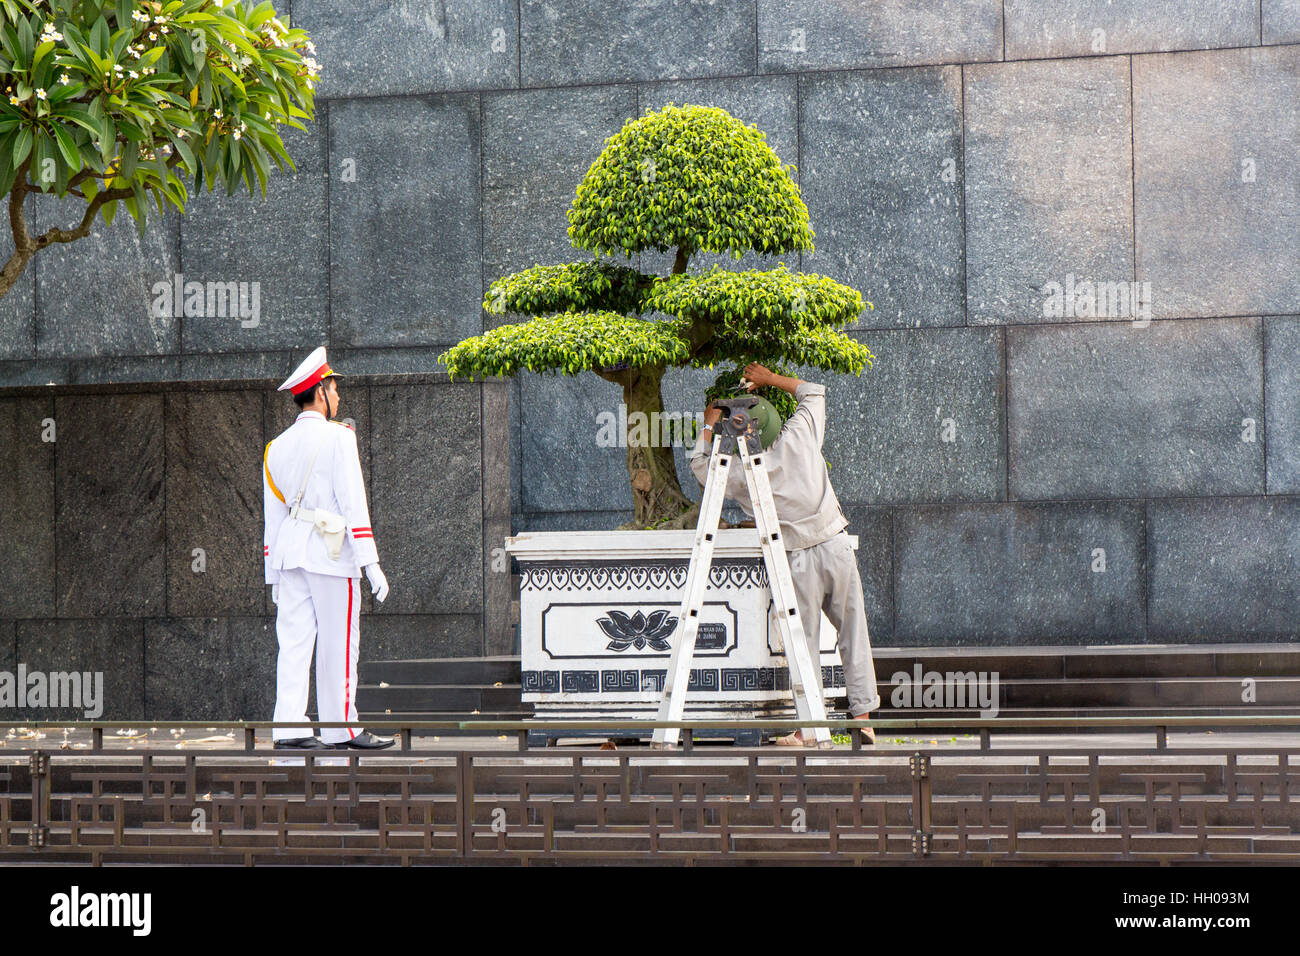 A soldier looks on while a gardener meticulously trims the bonsai tree. Ho Chi Minh Mausoleum, Hanoi, Vietnam. Stock Photo